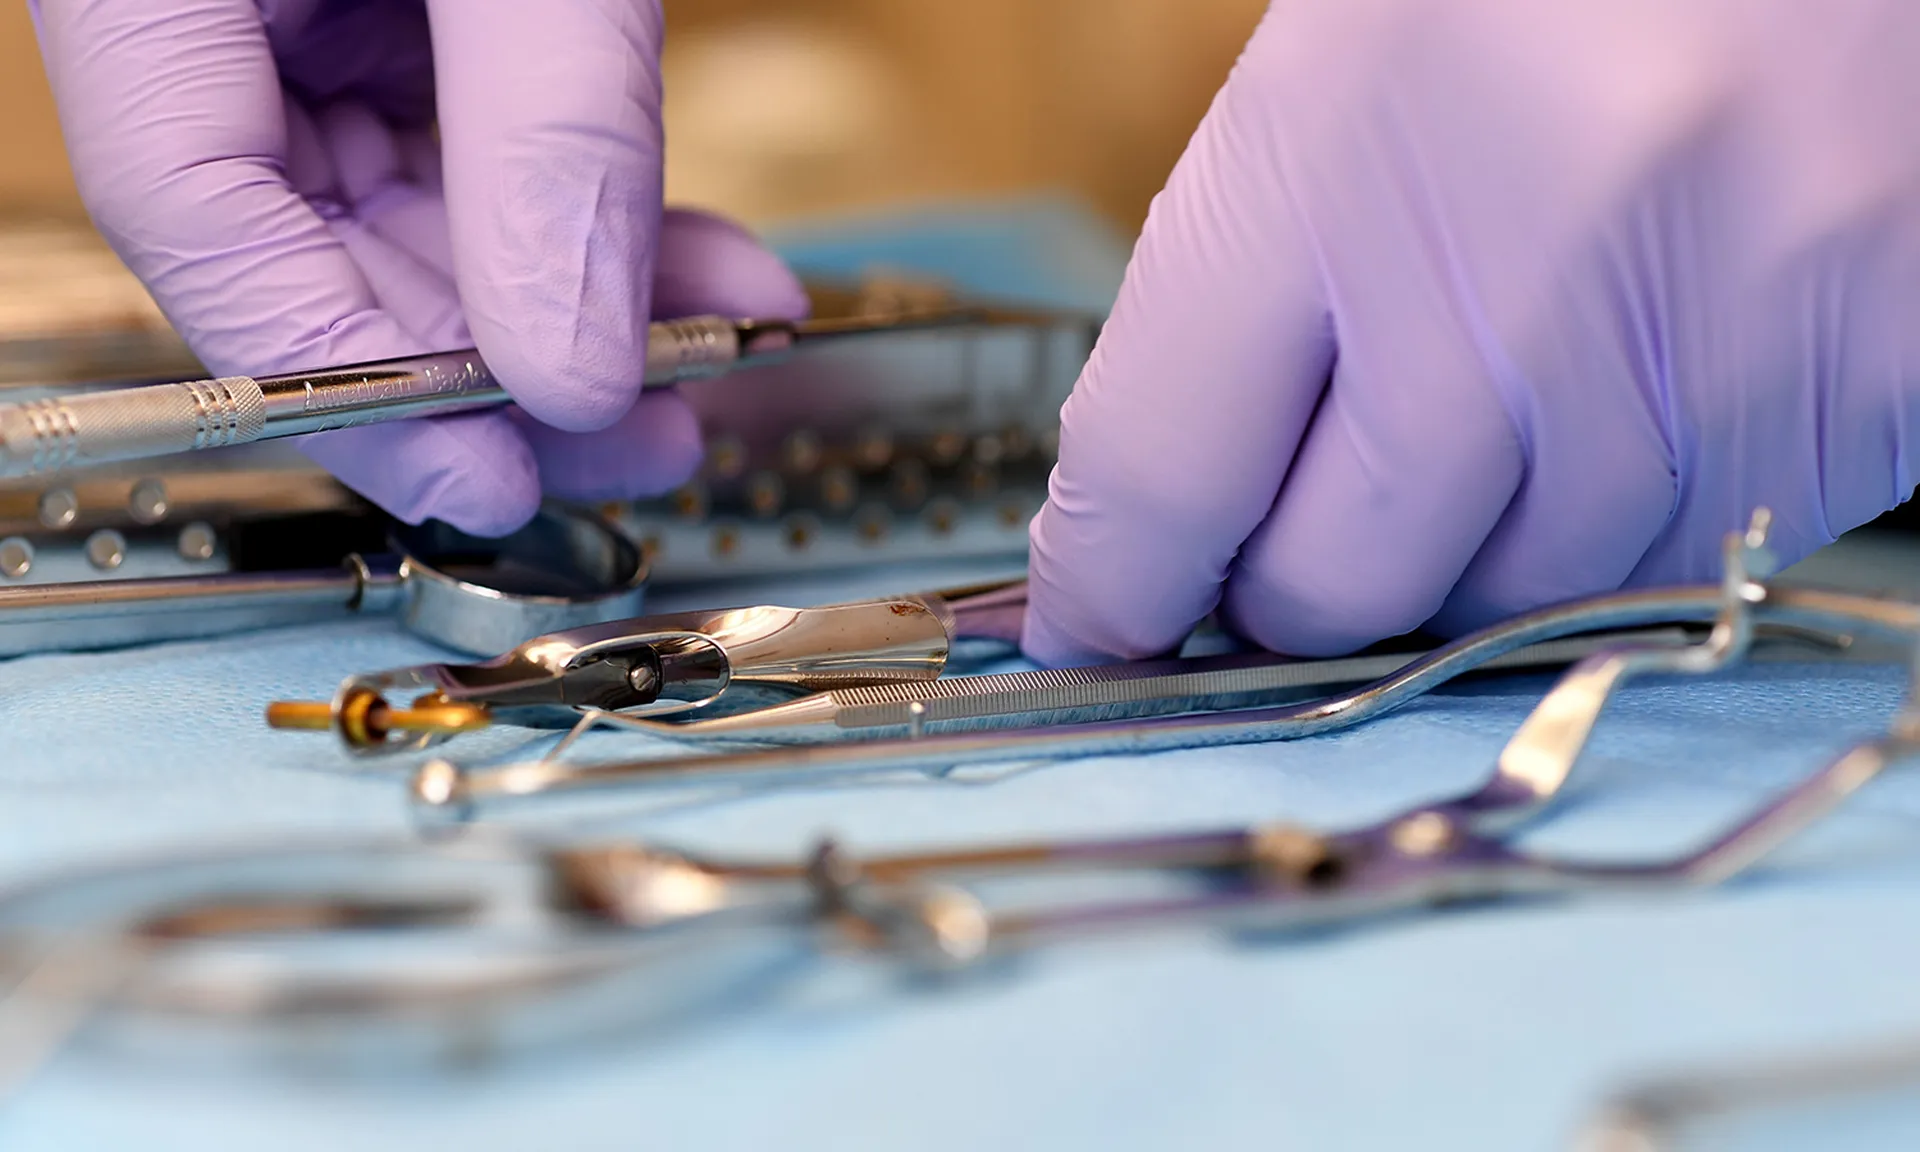 An Air Force dental lays out an array of dental instruments used in routine check-ups and procedures Sept. 7, 2017, at the medical treatment facility on Grand Forks Air Force Base, N.D. (Airman 1st Class Elora J. Martinez/Air Force)